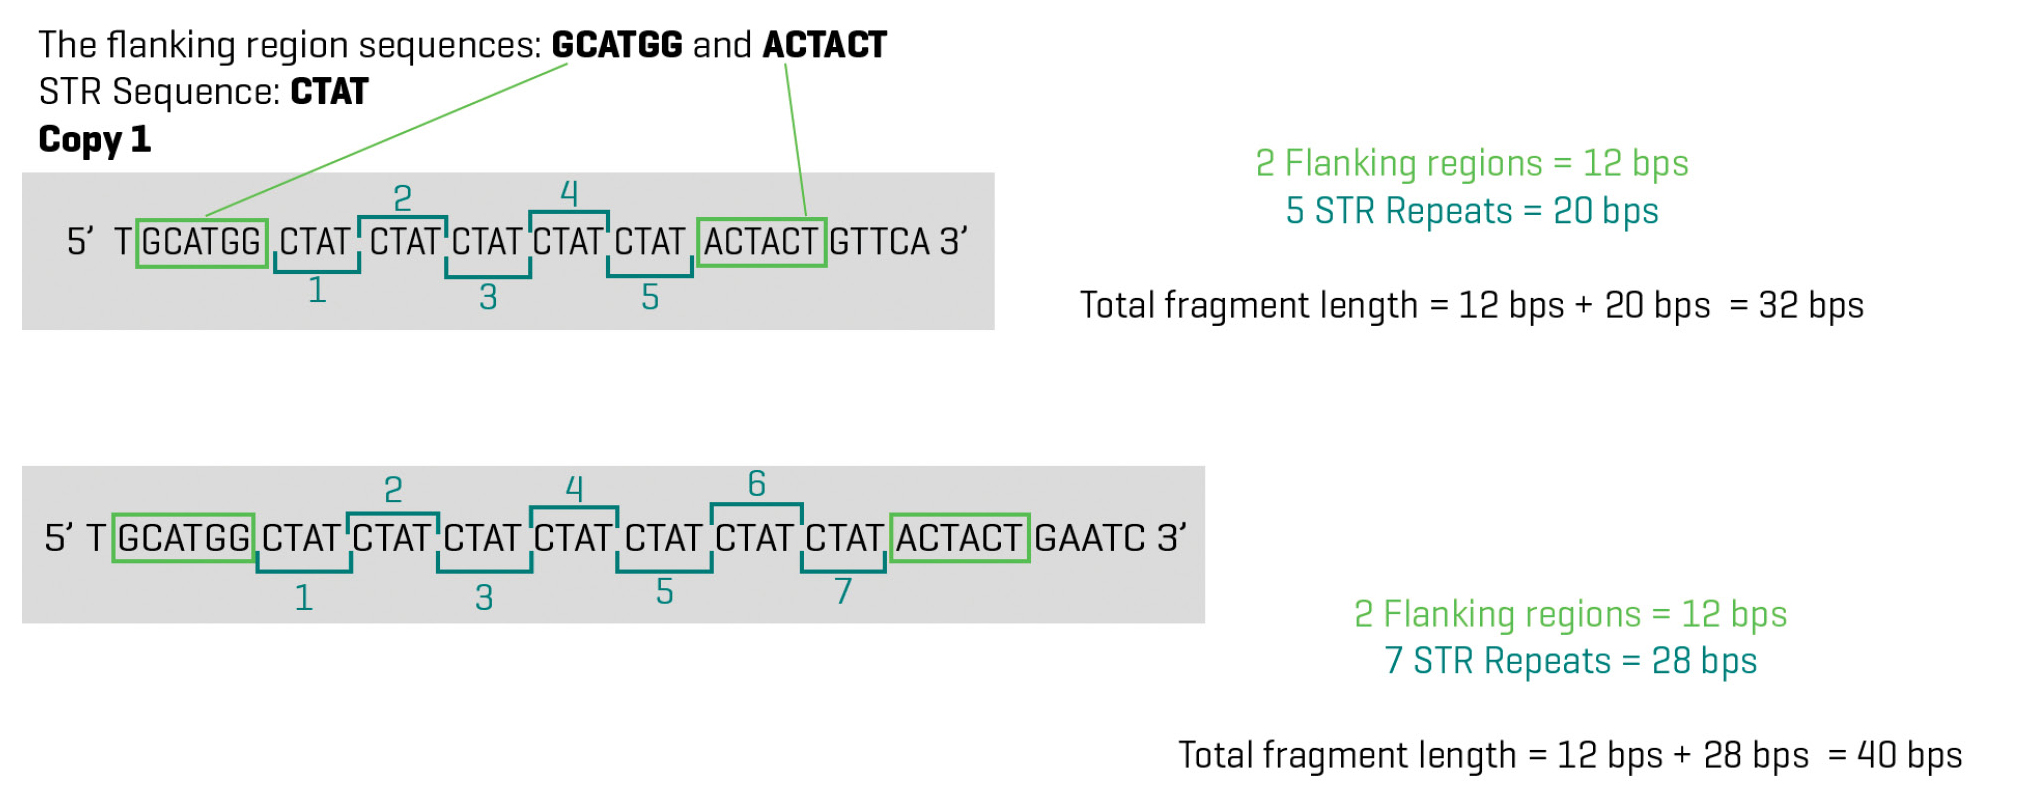 Figure 4  Flanking region example diagram.  The diagram shows one STR locus in an individual’s genome. In Copy 1, there are 5 repeats in Copy 2 there are 7 repeats. These differences can be analyzed using DNA analysis.